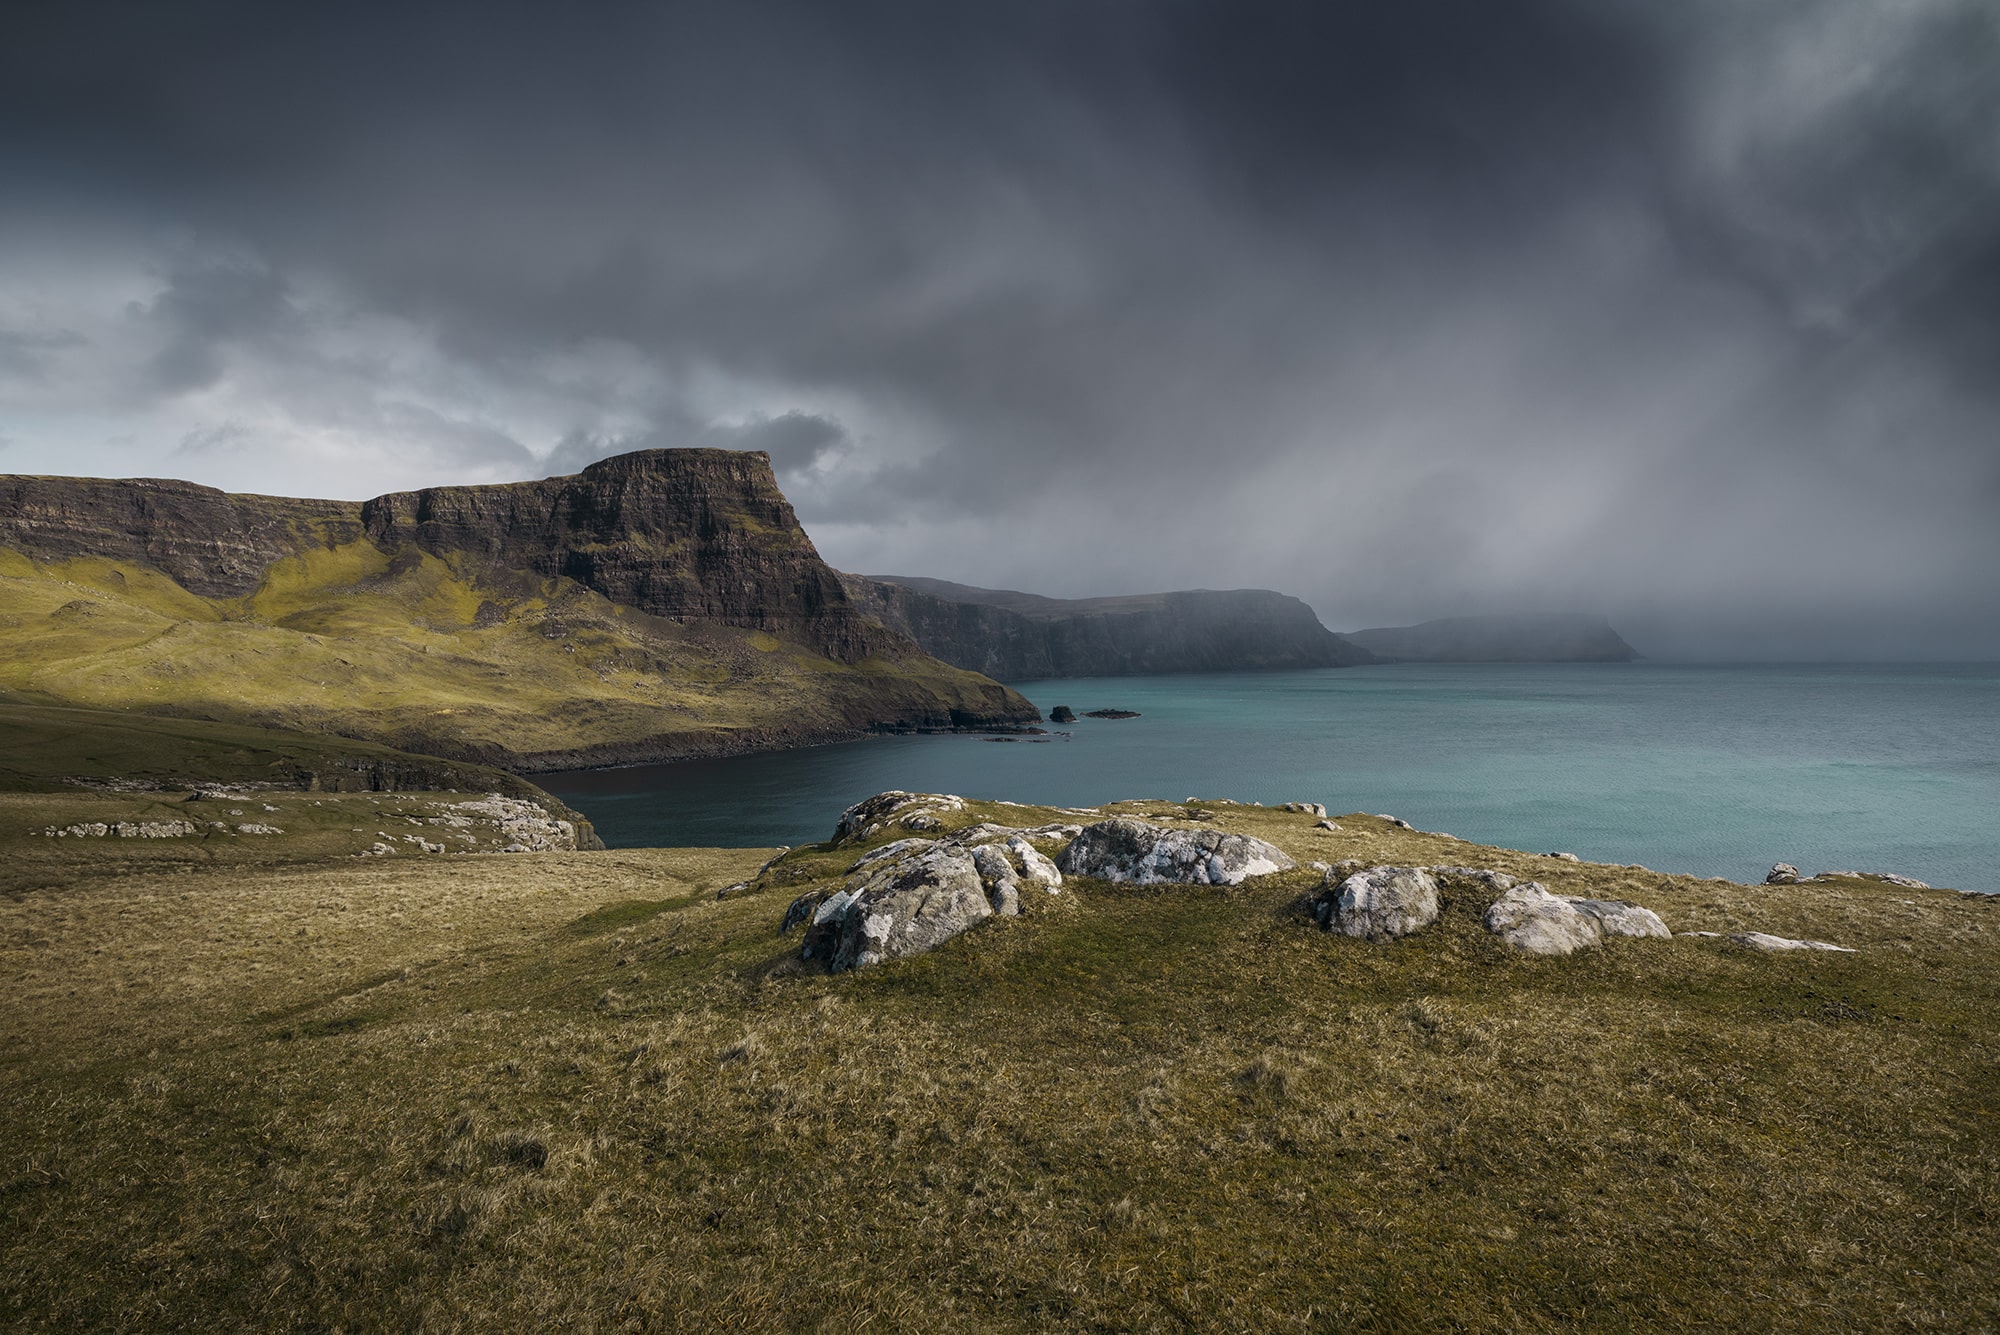 Immerse yourself in the rugged beauty of Skye Island, Scotland, with this captivating landscape photography captured by Swiss photographer Jennifer Esseiva and her Nikon D810. Behold the dramatic scene of a rainstorm sweeping over Waterstein Head, near the iconic Neist Point, as captured through Jennifer Esseiva's lens. The tumultuous skies and swirling clouds create a sense of raw energy and untamed beauty, while the rugged cliffs of Skye Island stand resilient against the elements. Join Esseiva on this visual journey through the Scottish Highlands, where every frame captures the timeless drama and majesty of nature's power.